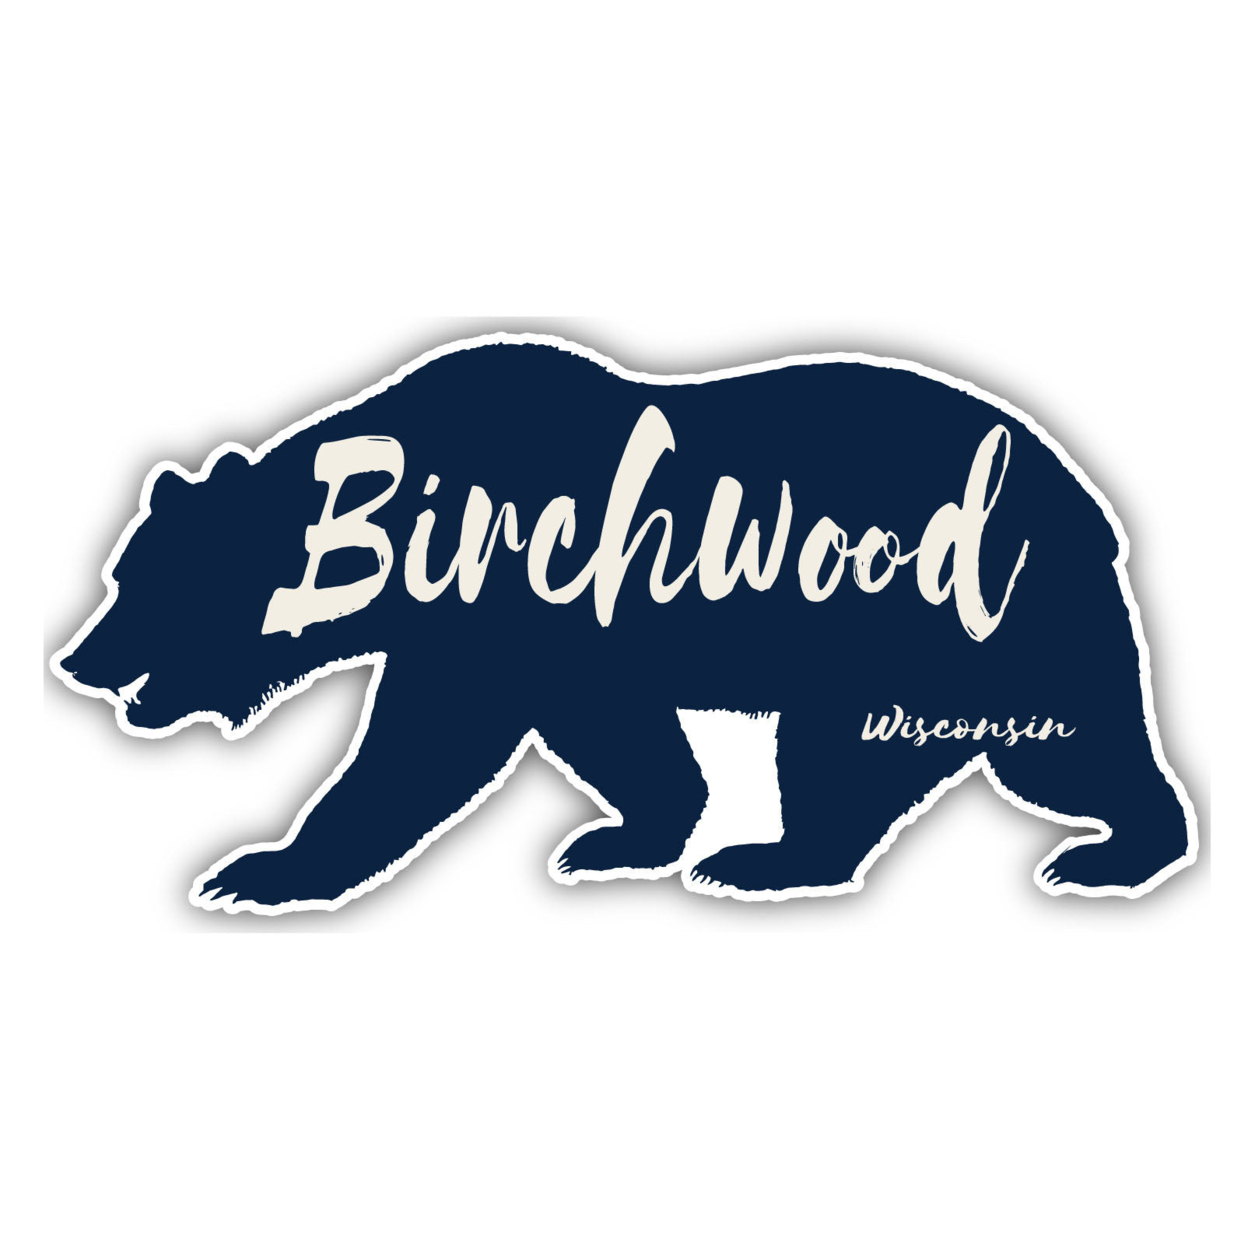 Birchwood Wisconsin Souvenir Decorative Stickers (Choose Theme And Size) - 4-Pack, 12-Inch, Bear